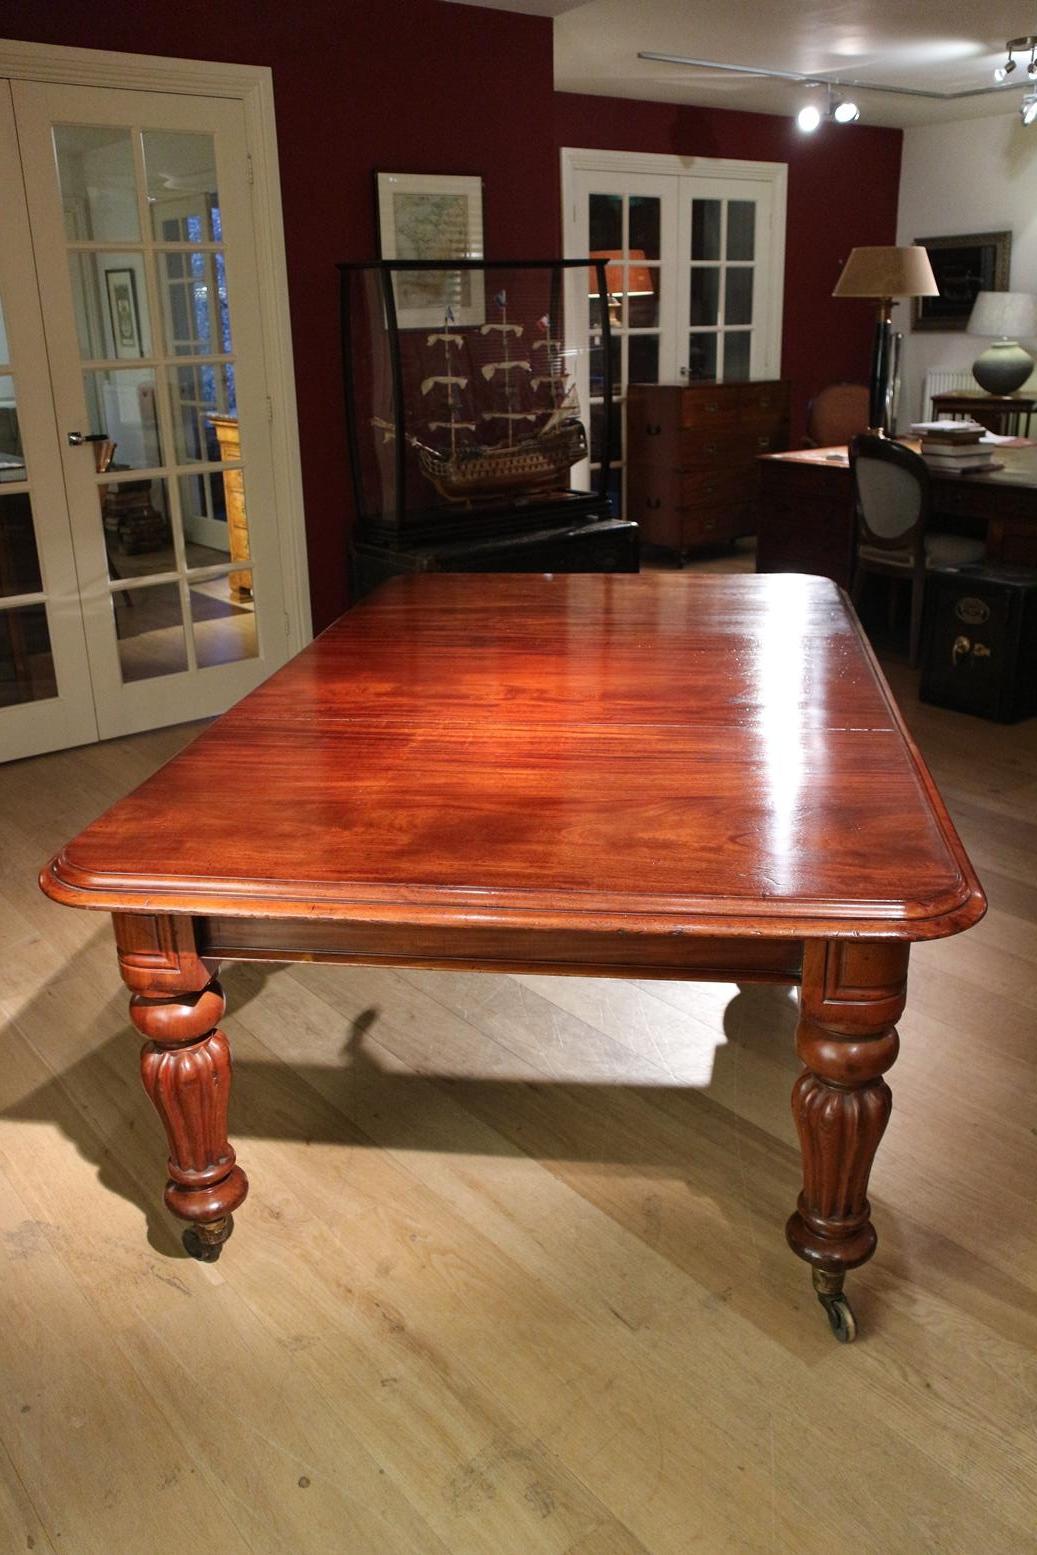 Victorian antique mahogany table with extra original sheet. Beautiful quality mahogany with a warm color. It is extending table with a wind out system. Beautiful stylish table.
Origin: England, Victorian
Period: Approx. 1840
Size: 128cm x 144cm /